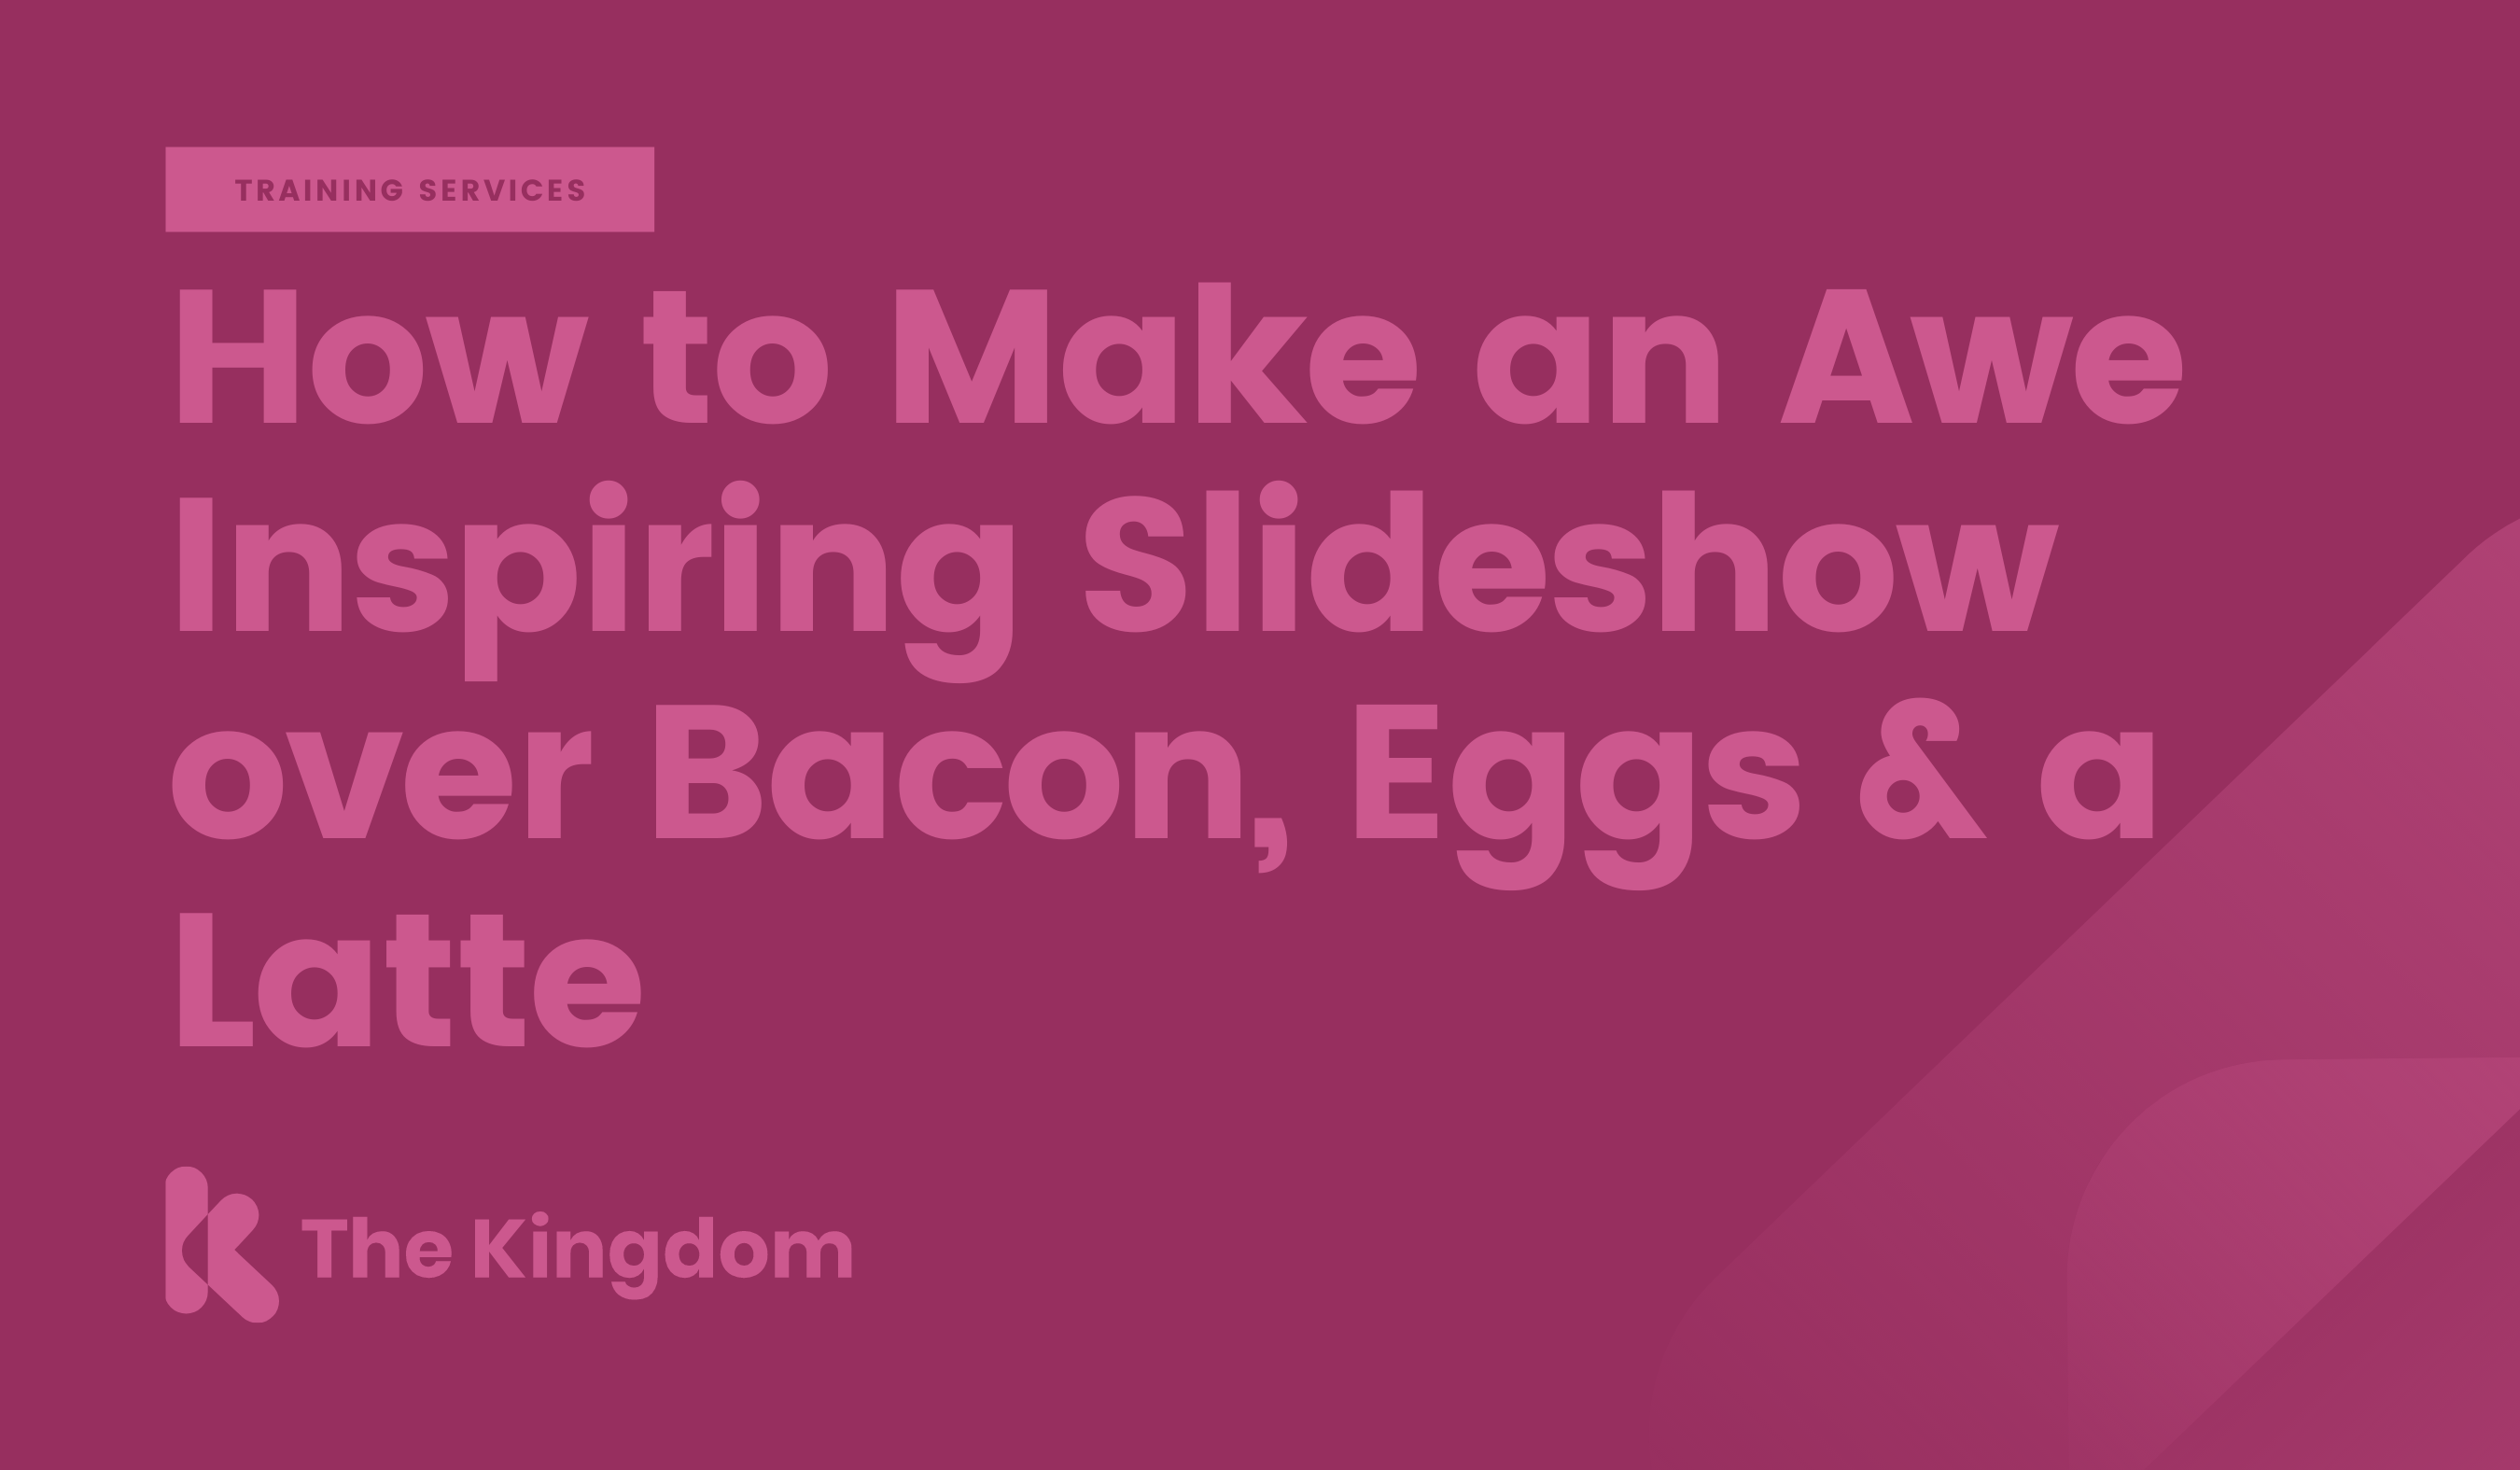 How to Make an Awe Inspiring Slideshow over Bacon, Eggs and a Latte